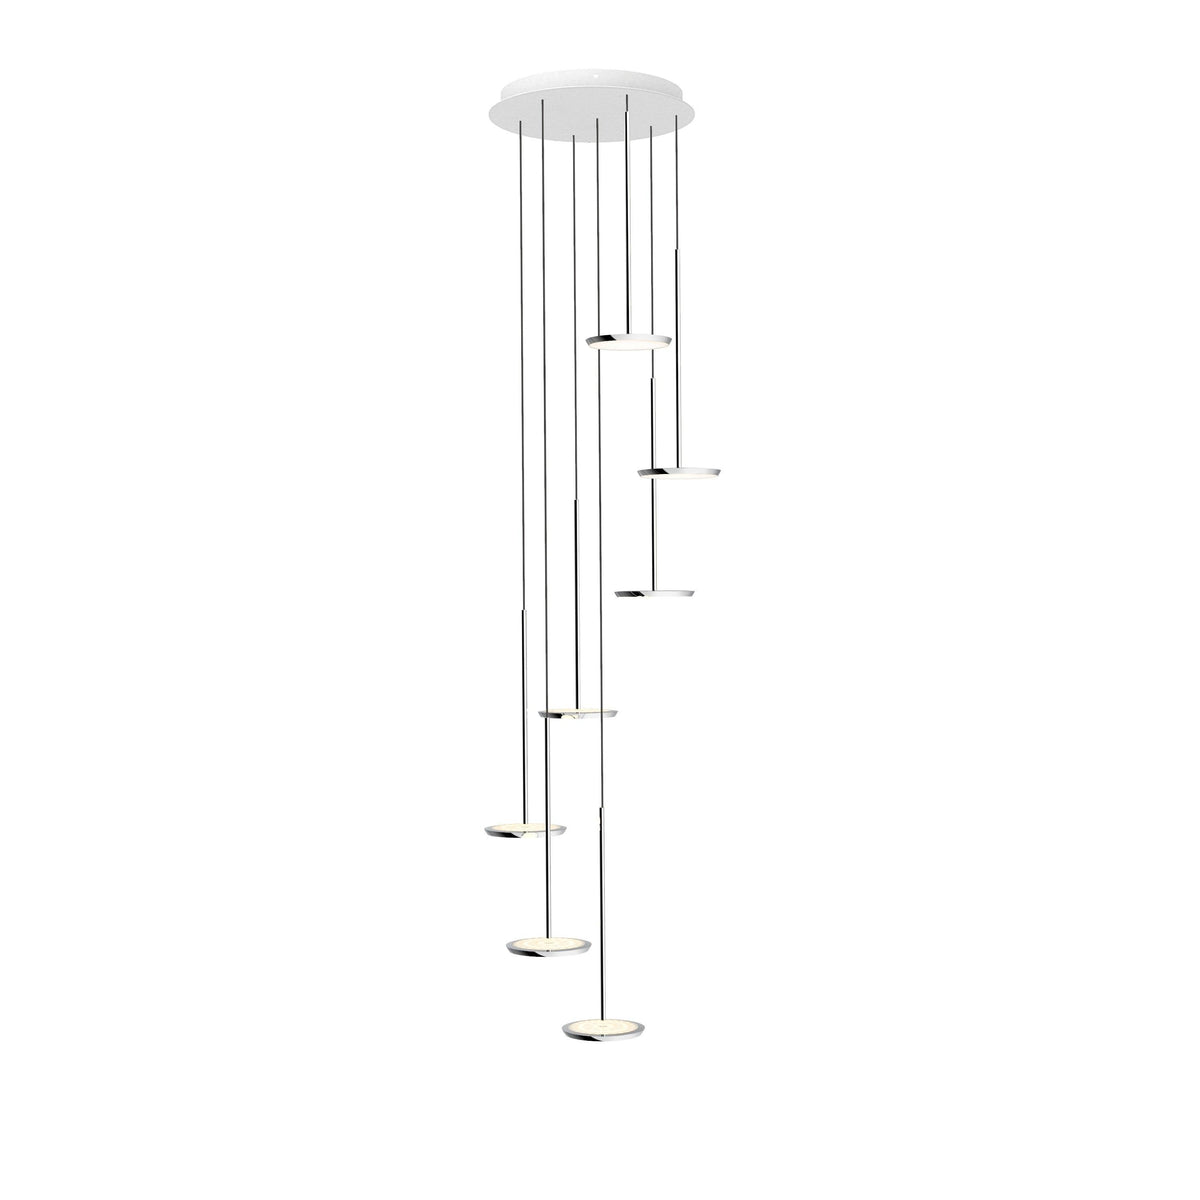 Pablo Designs - Sky Solo Chandelier - SKY 7 CHAND | Montreal Lighting & Hardware